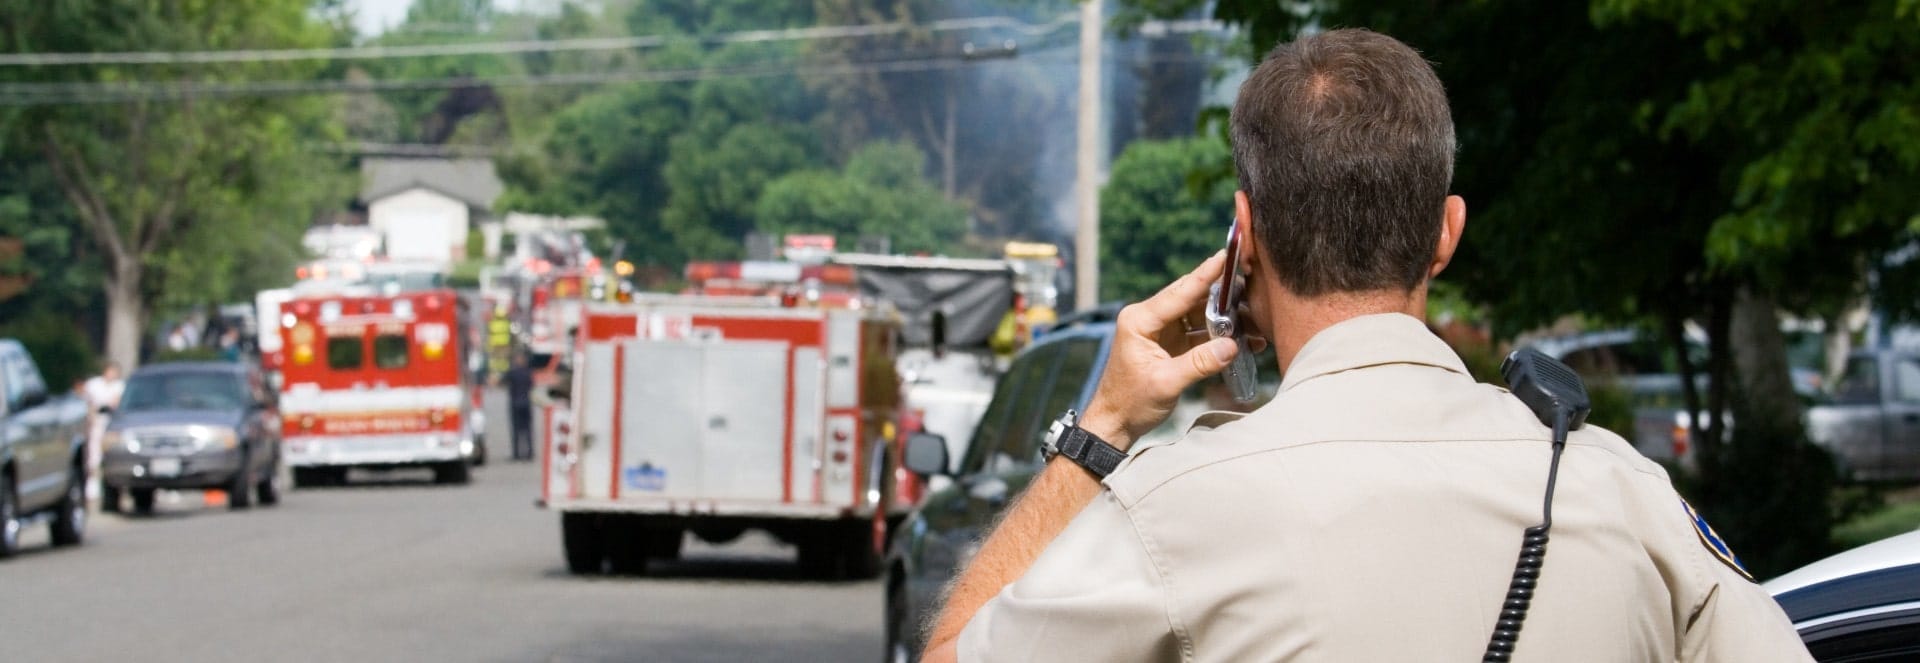 Discover the effectiveness of dual dispatch emergency response